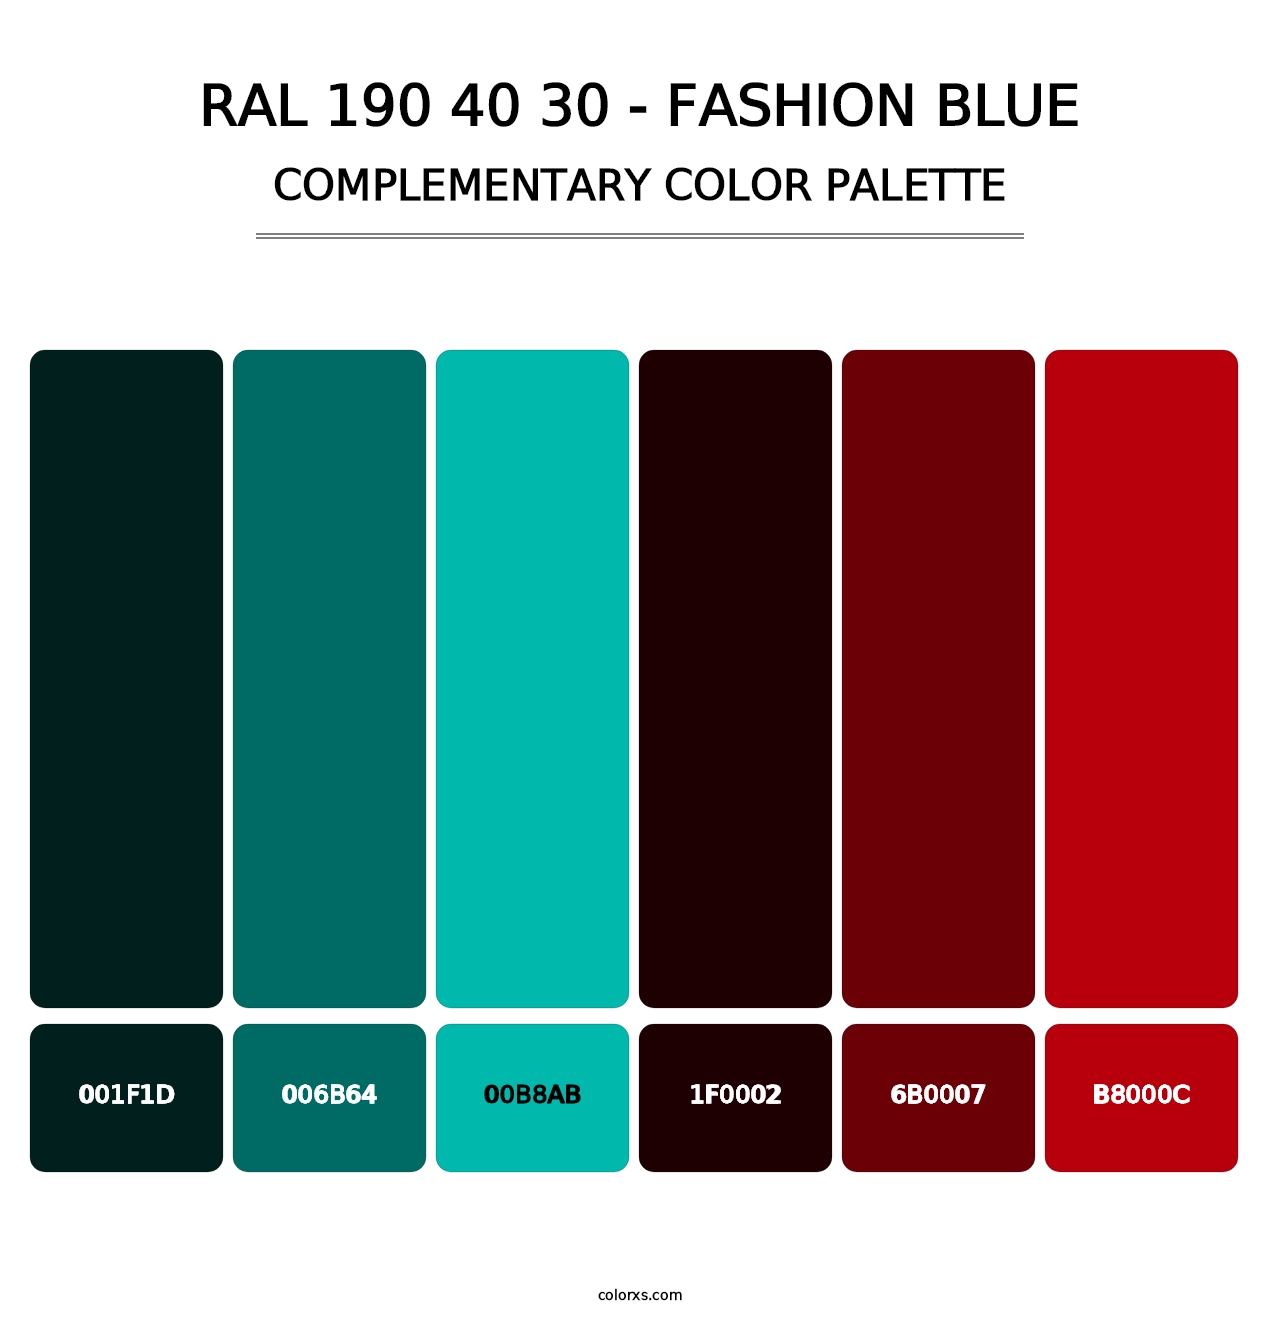 RAL 190 40 30 - Fashion Blue - Complementary Color Palette